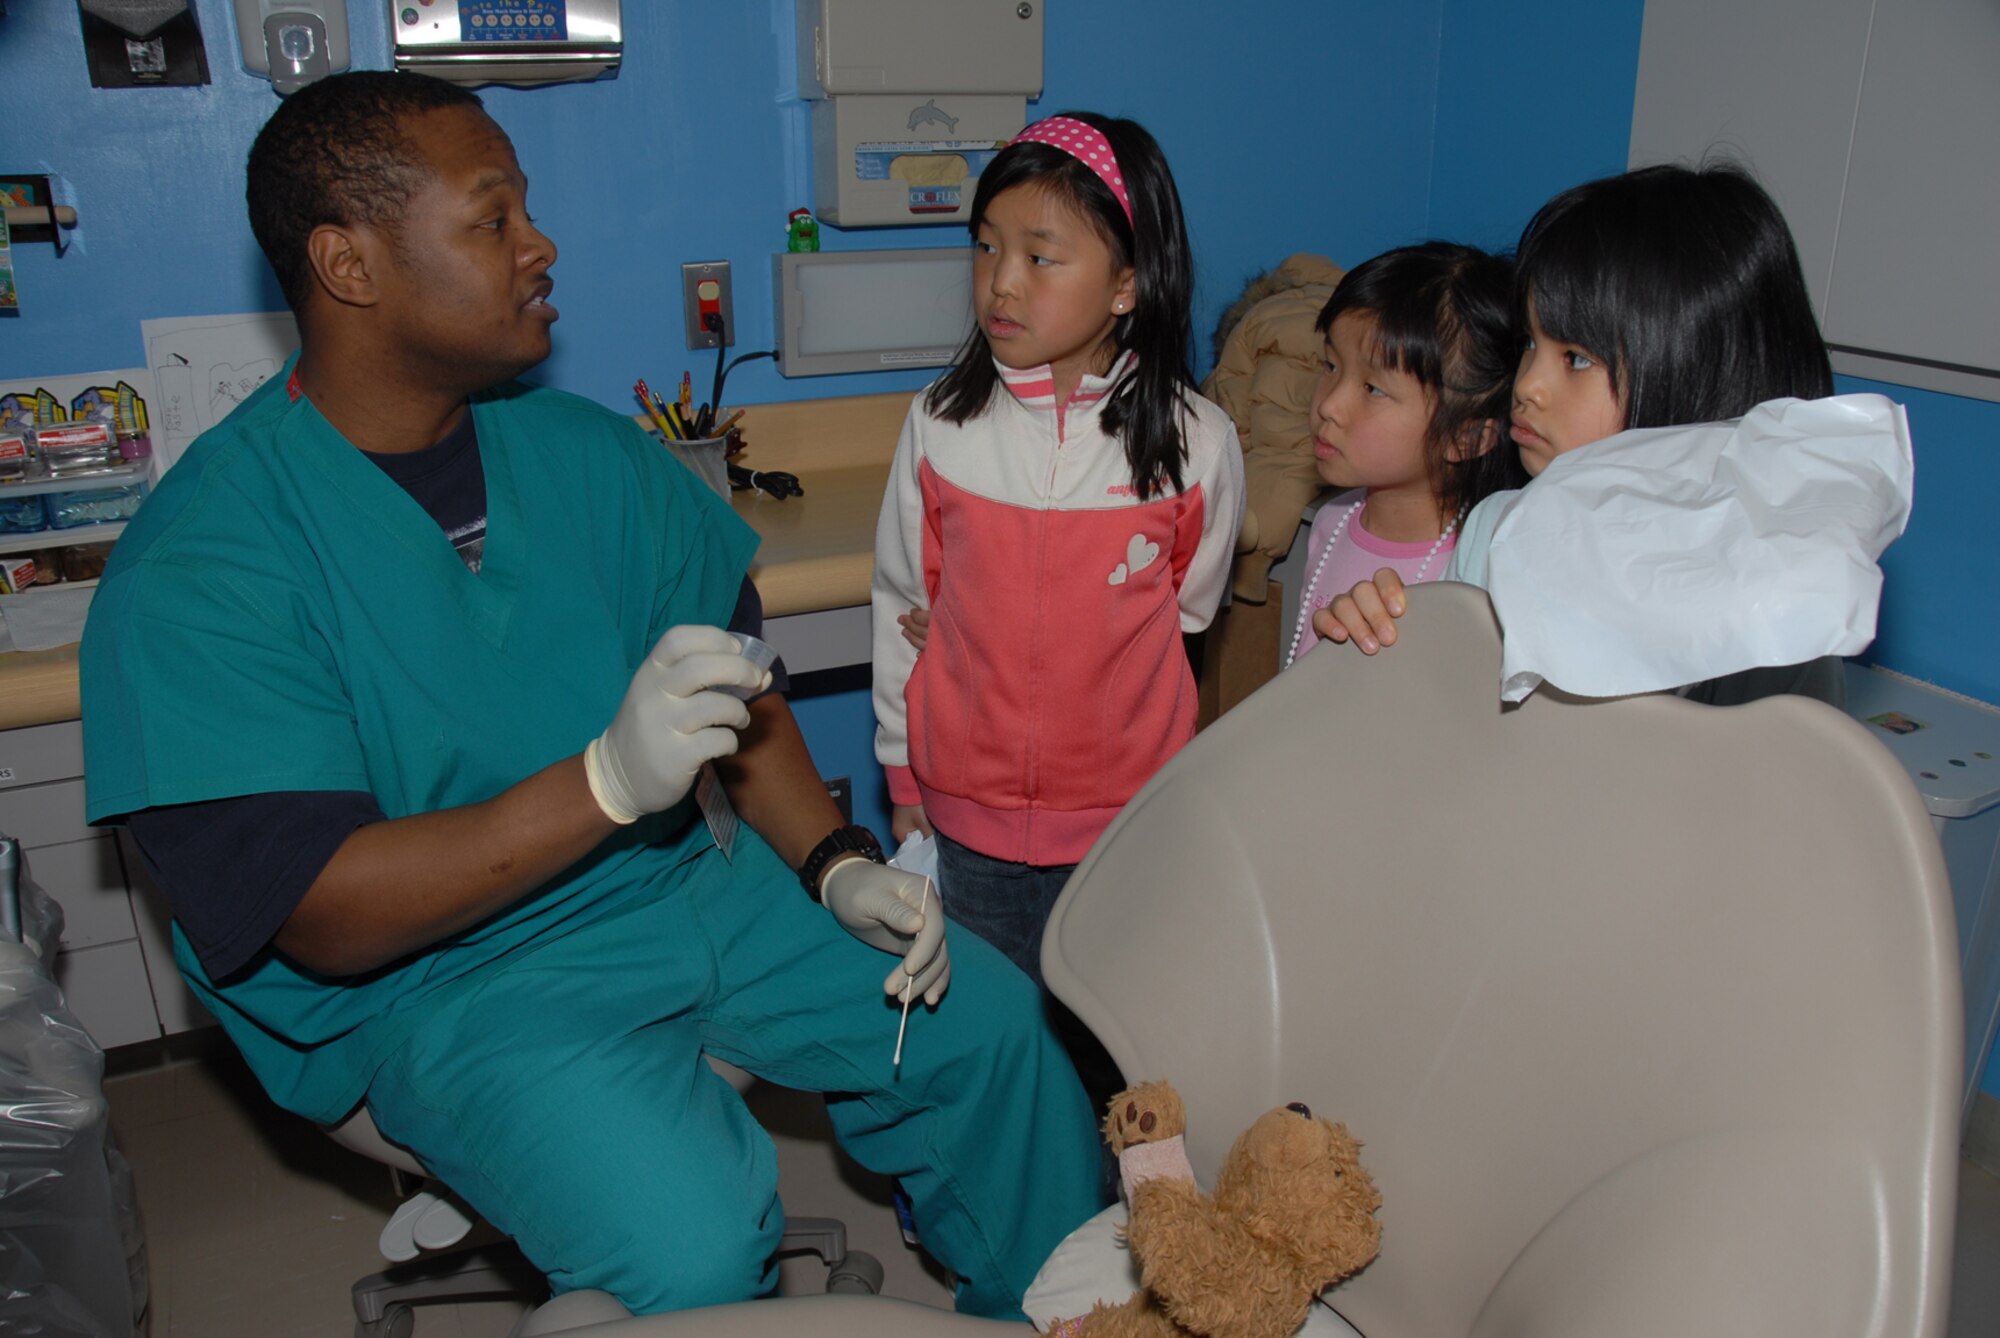 MISAWA AIR BASE, Japan -- Staff Sgt. Adrian Outlaw, 35th Dental Squadron, explains proper dental care to Misawa children during the annual Teddy Bear Clinic here on Mar. 1, 2008.  Children brought their stuffed animals to the base hospital to have them checked out by medical professionals.  The clinic is designed to give children a better understanding of hospitals and to help curb their fears of them.  (U.S. Air Force photo by Senior Airman Laura R. McFarlane)